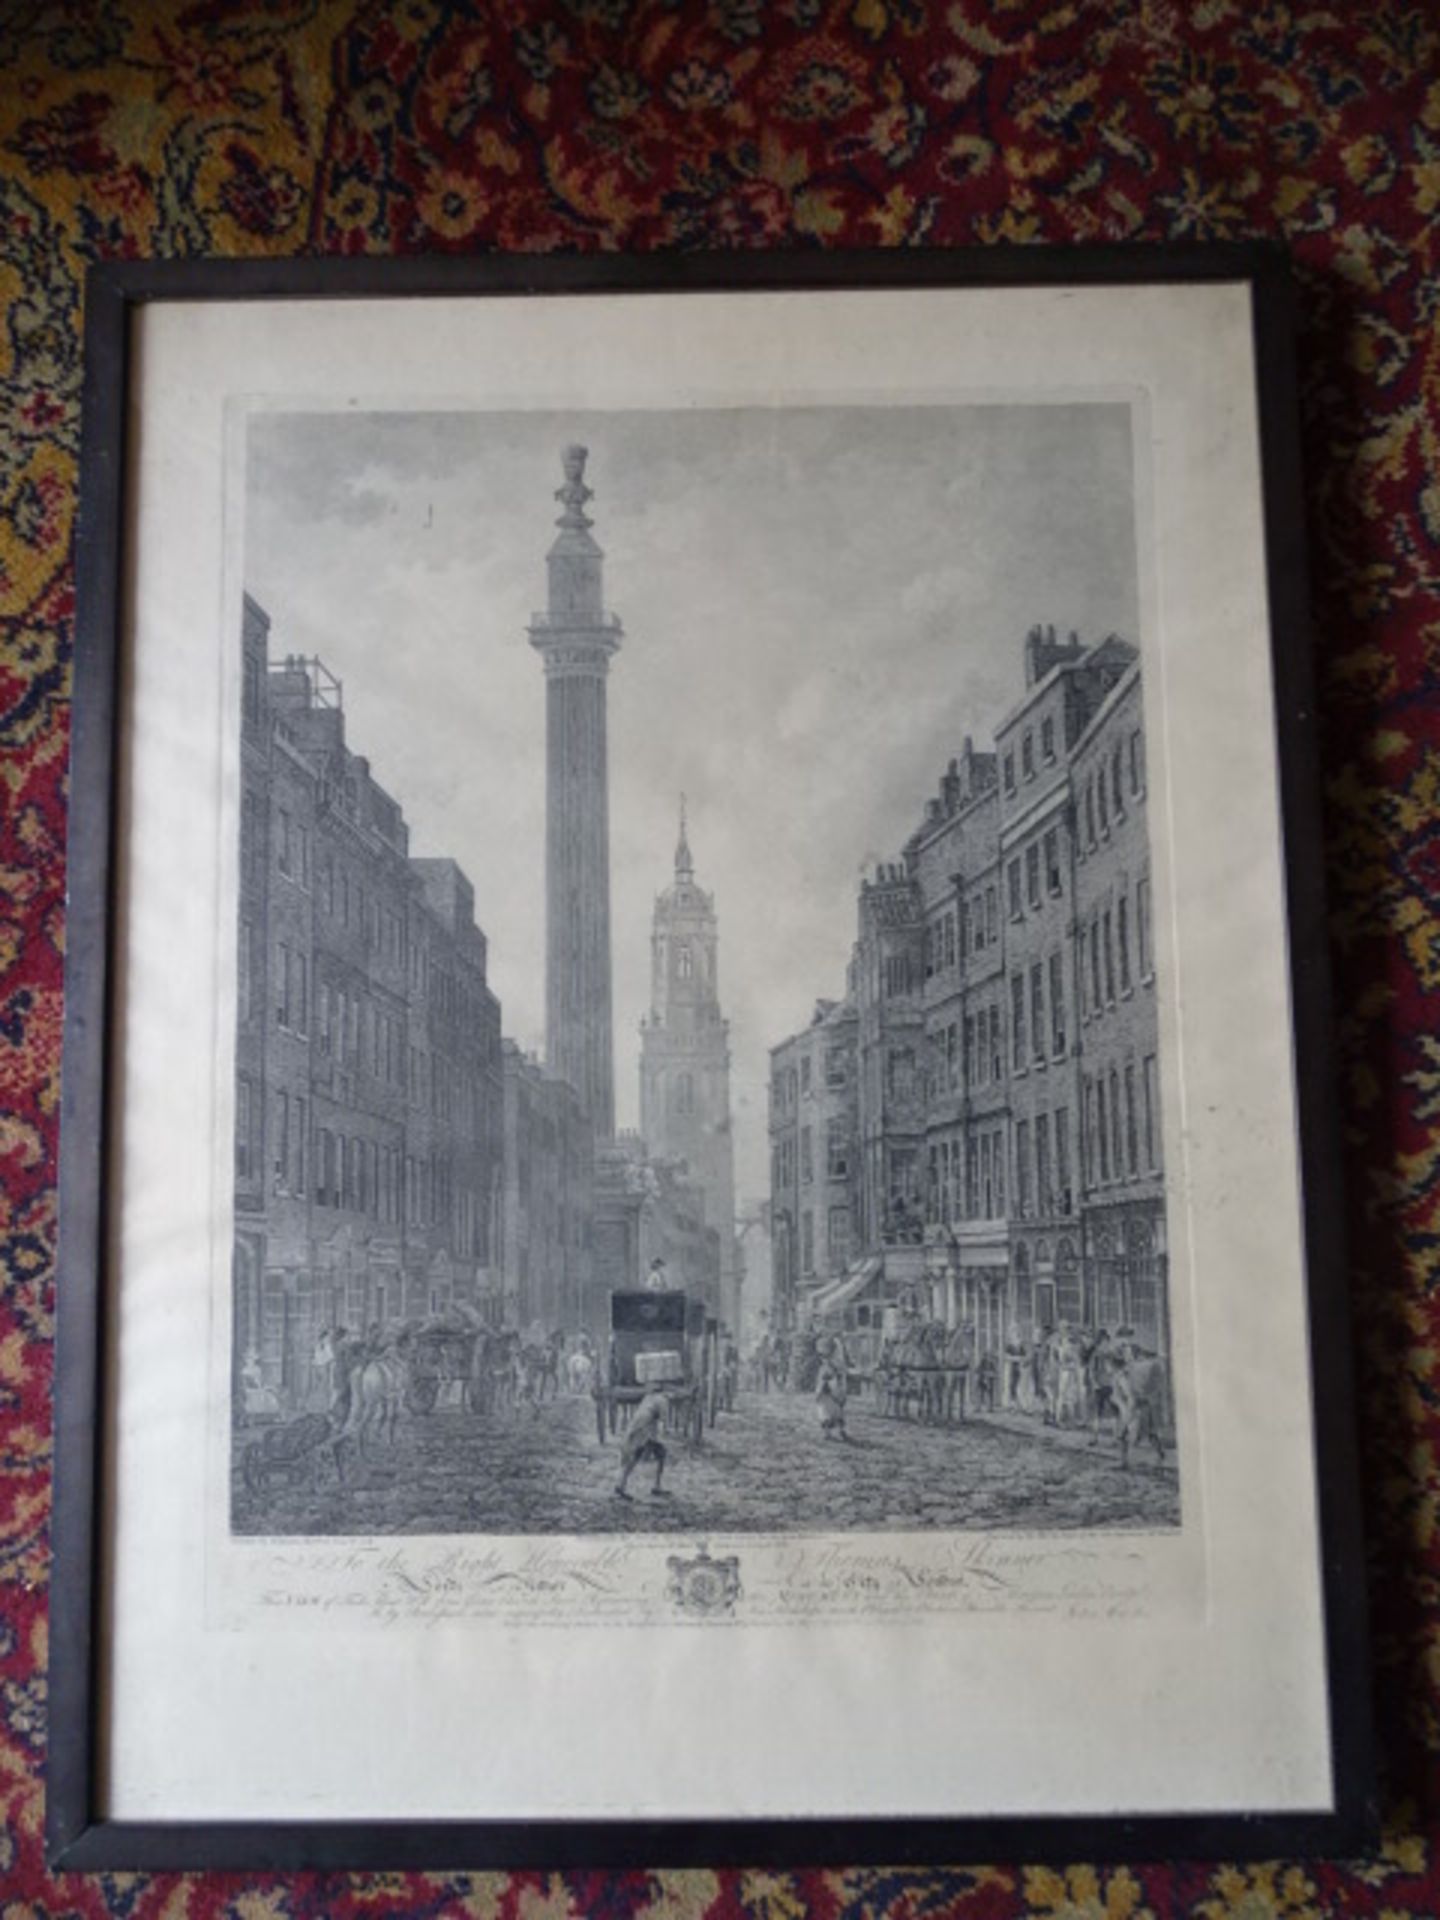 Etching of Fish Street, London, framed and glazed 56cm x 71cm approx